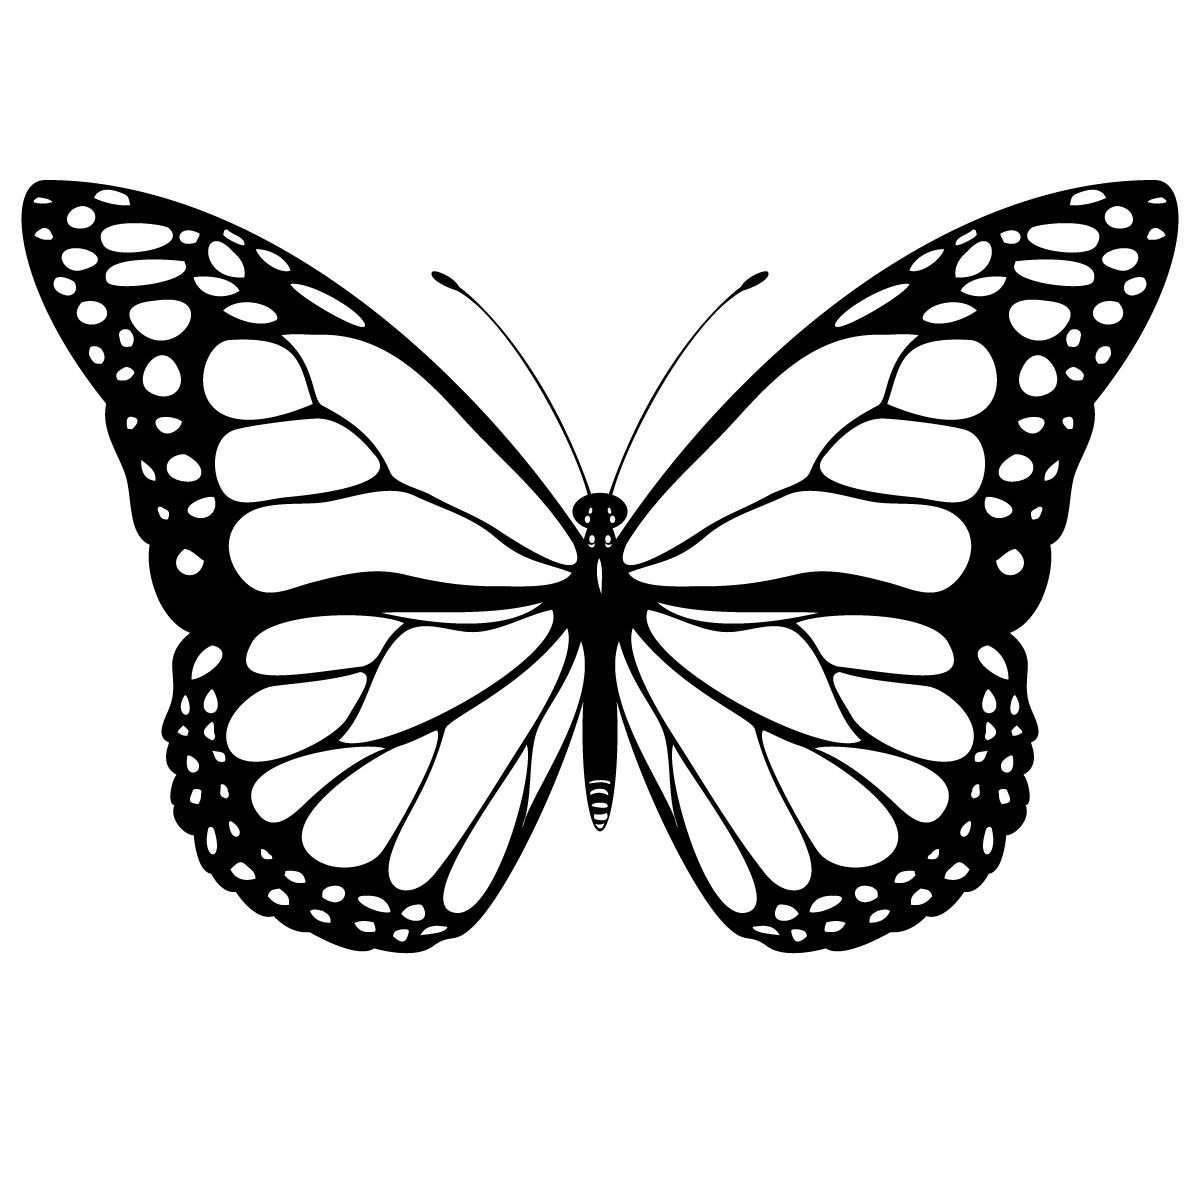 Printable incep imagine ex. Butterfly clipart vector